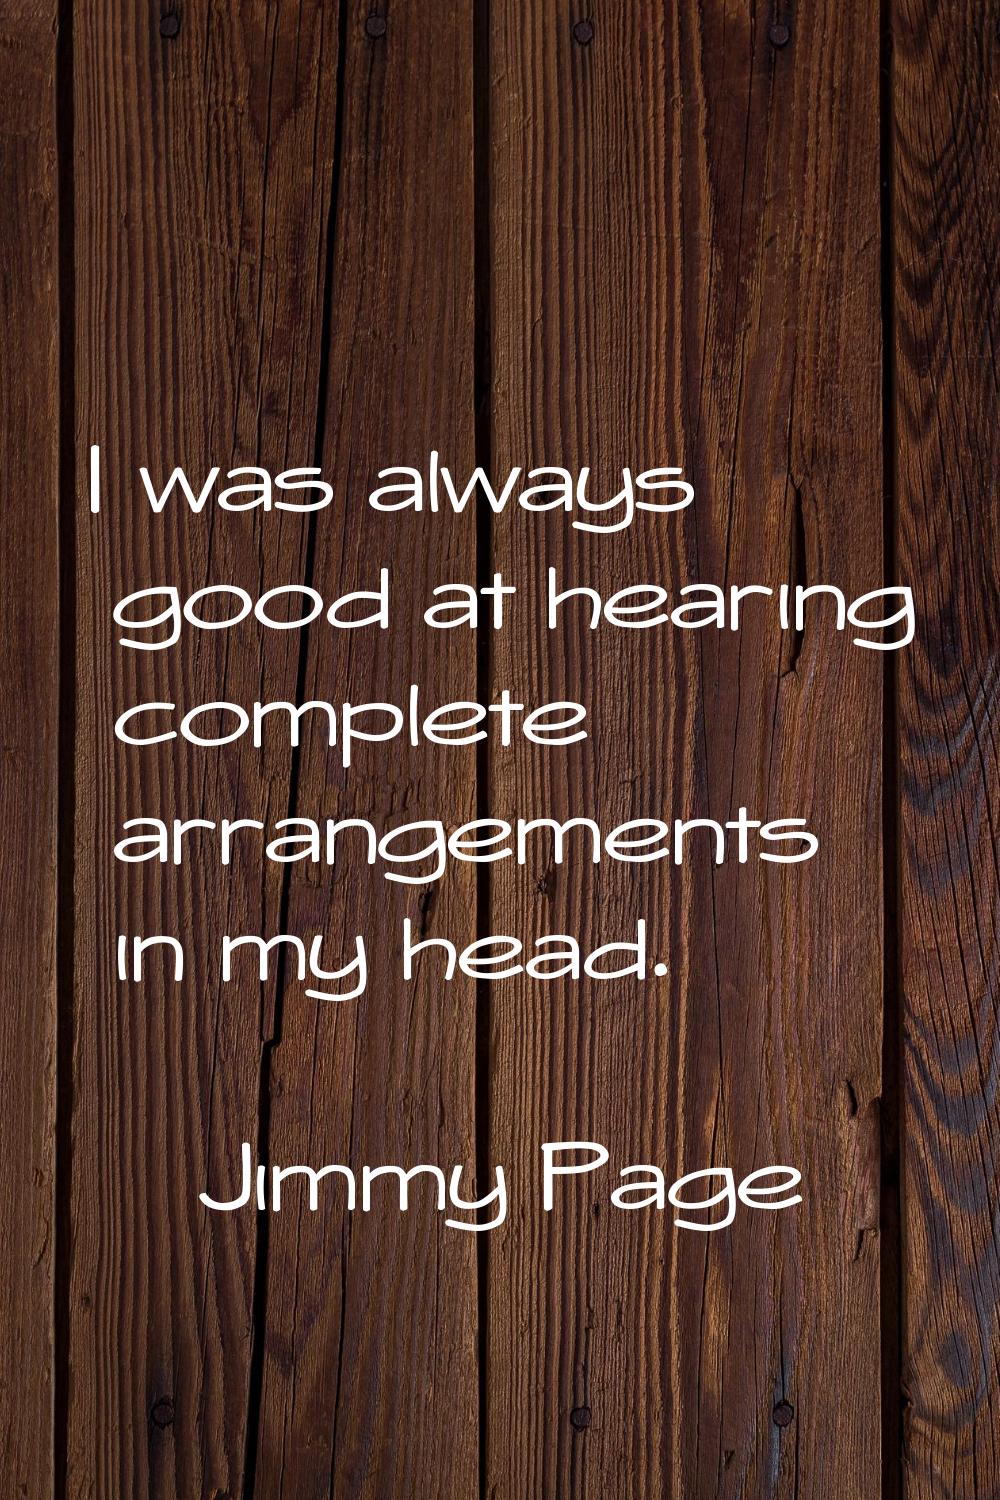 I was always good at hearing complete arrangements in my head.